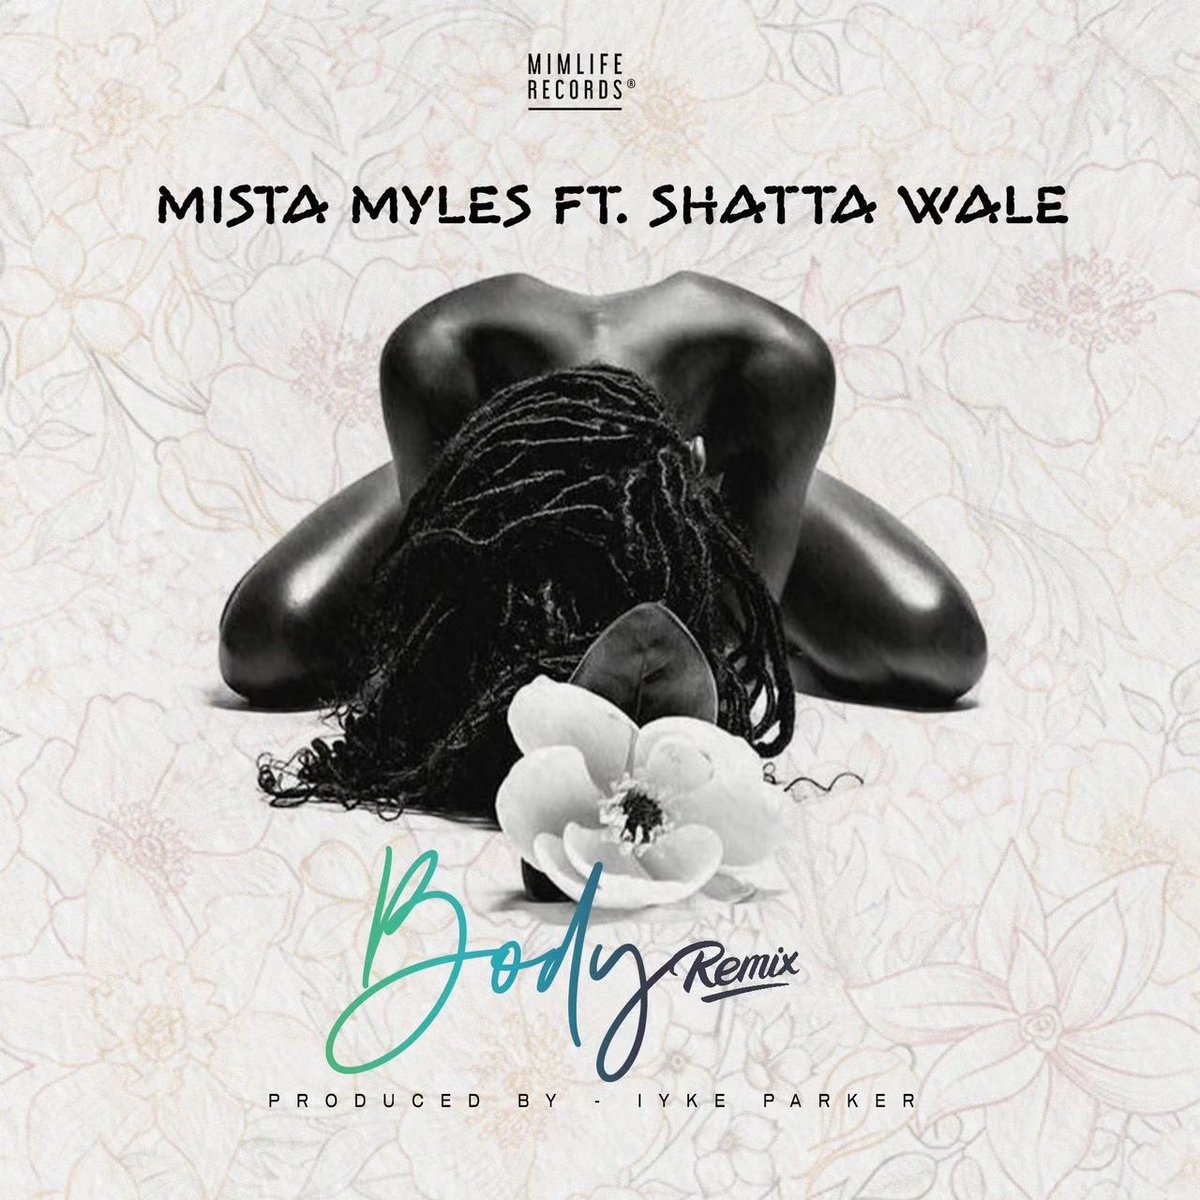 Brand new music from @mistamyles_ featuring @shattawalegh titled 'Body' RMX, premiering on #DaybreakHitz with @andydosty.